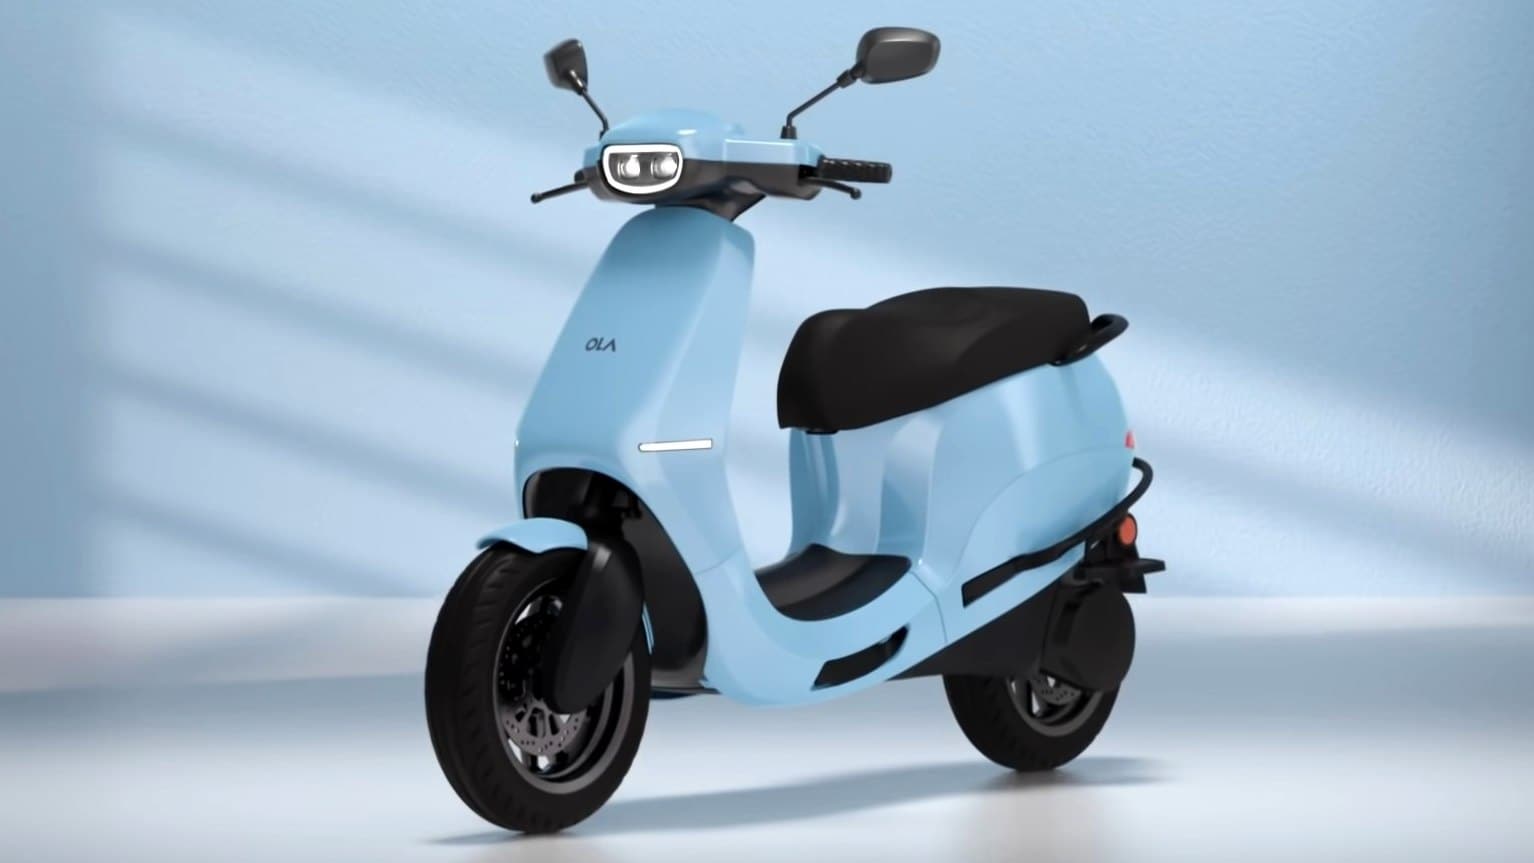 Top 5 Electric Scooters Launched, Which Is The Most Affordable For You?